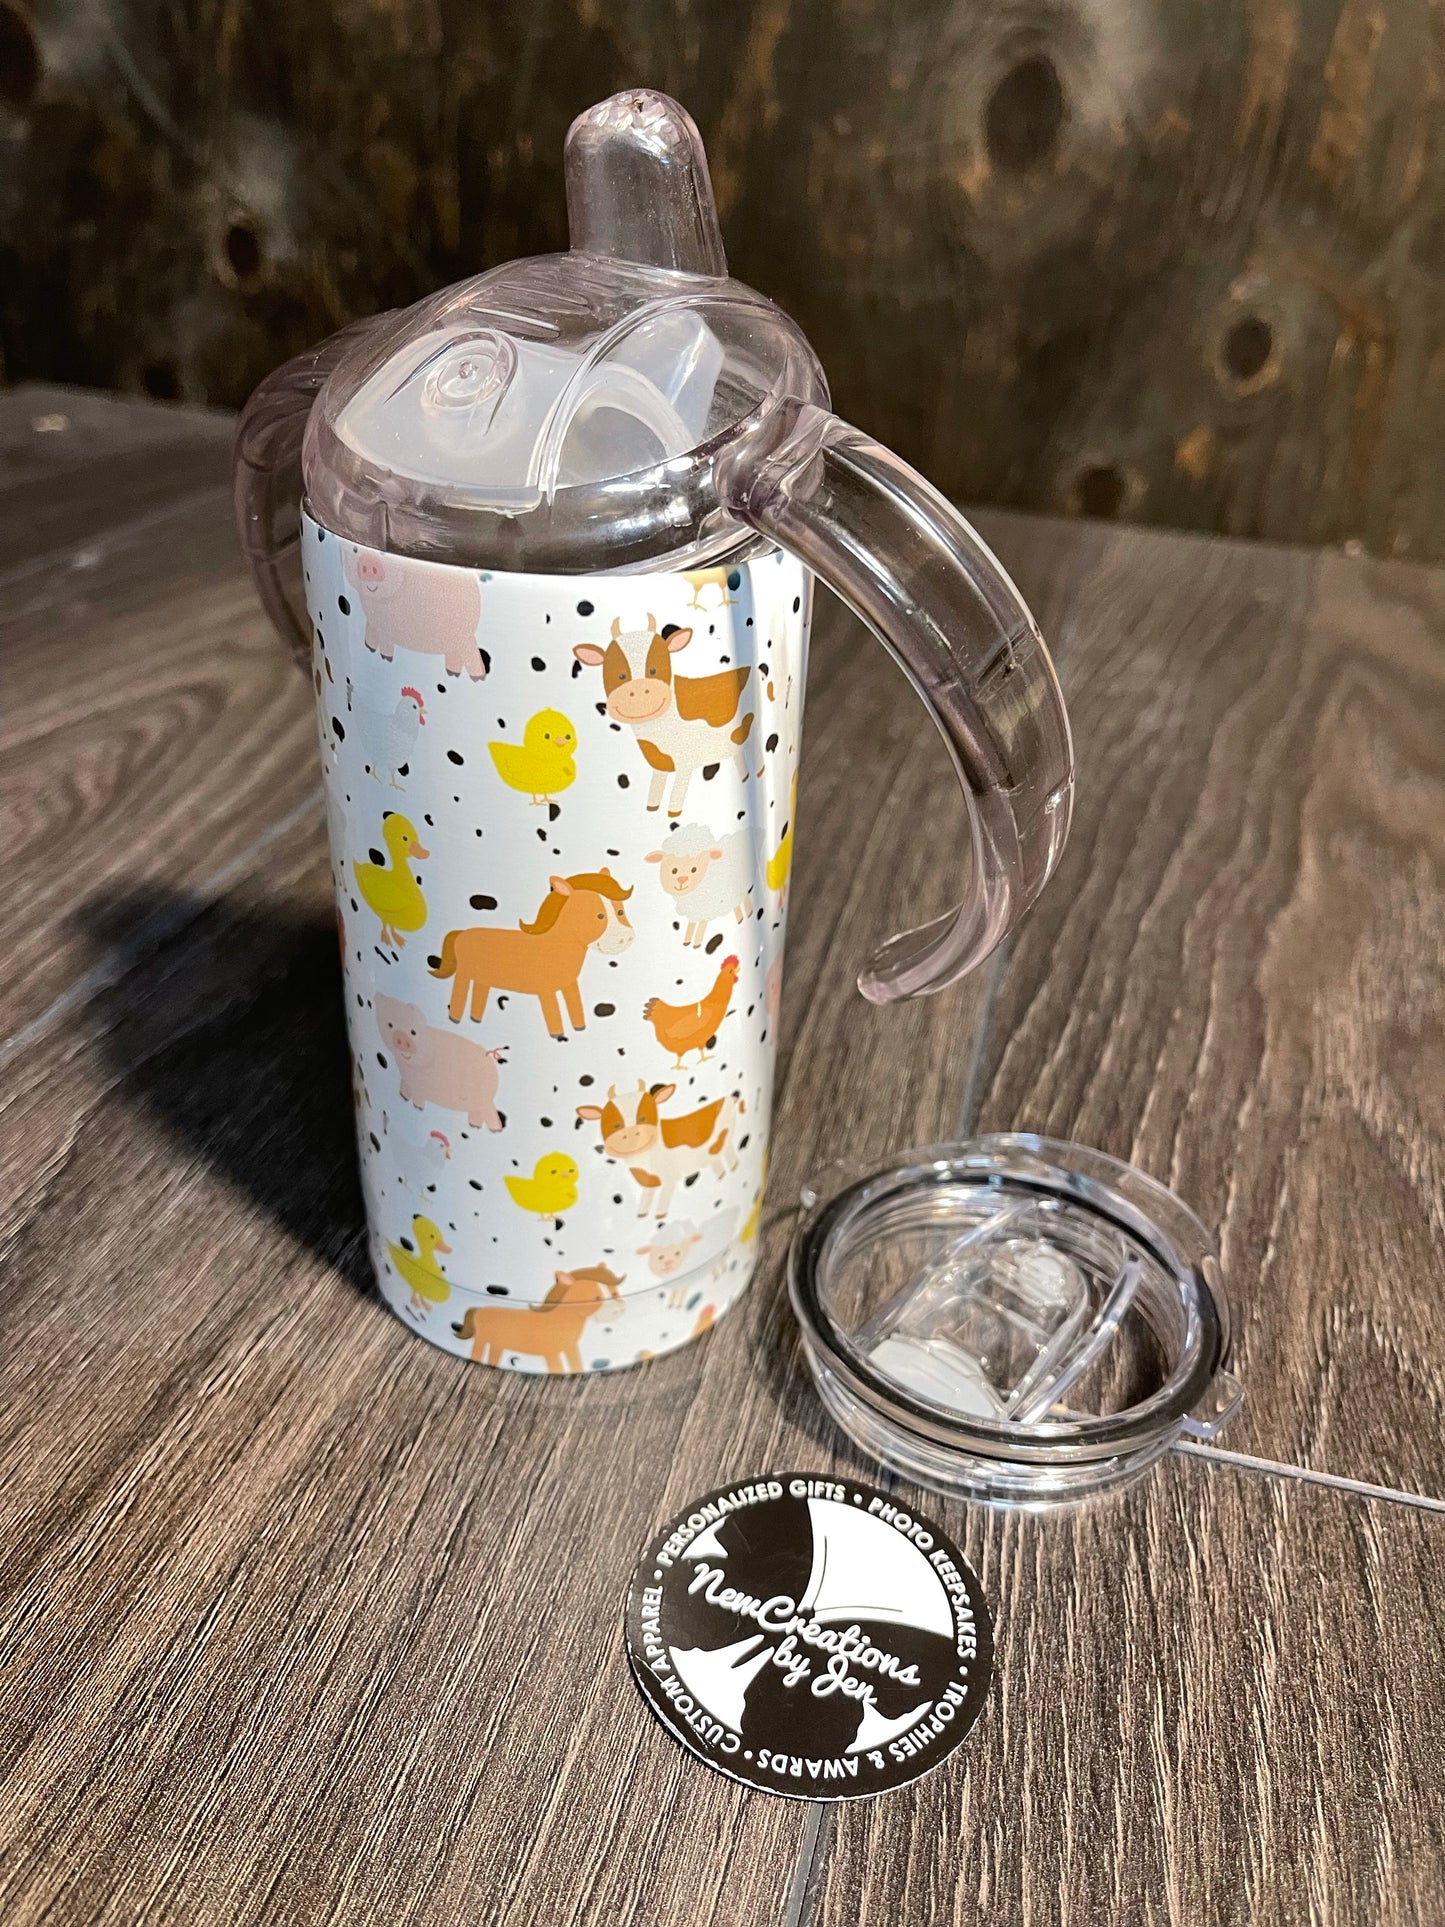 Stainless Steel 12oz cup with two lids - regular and sippy